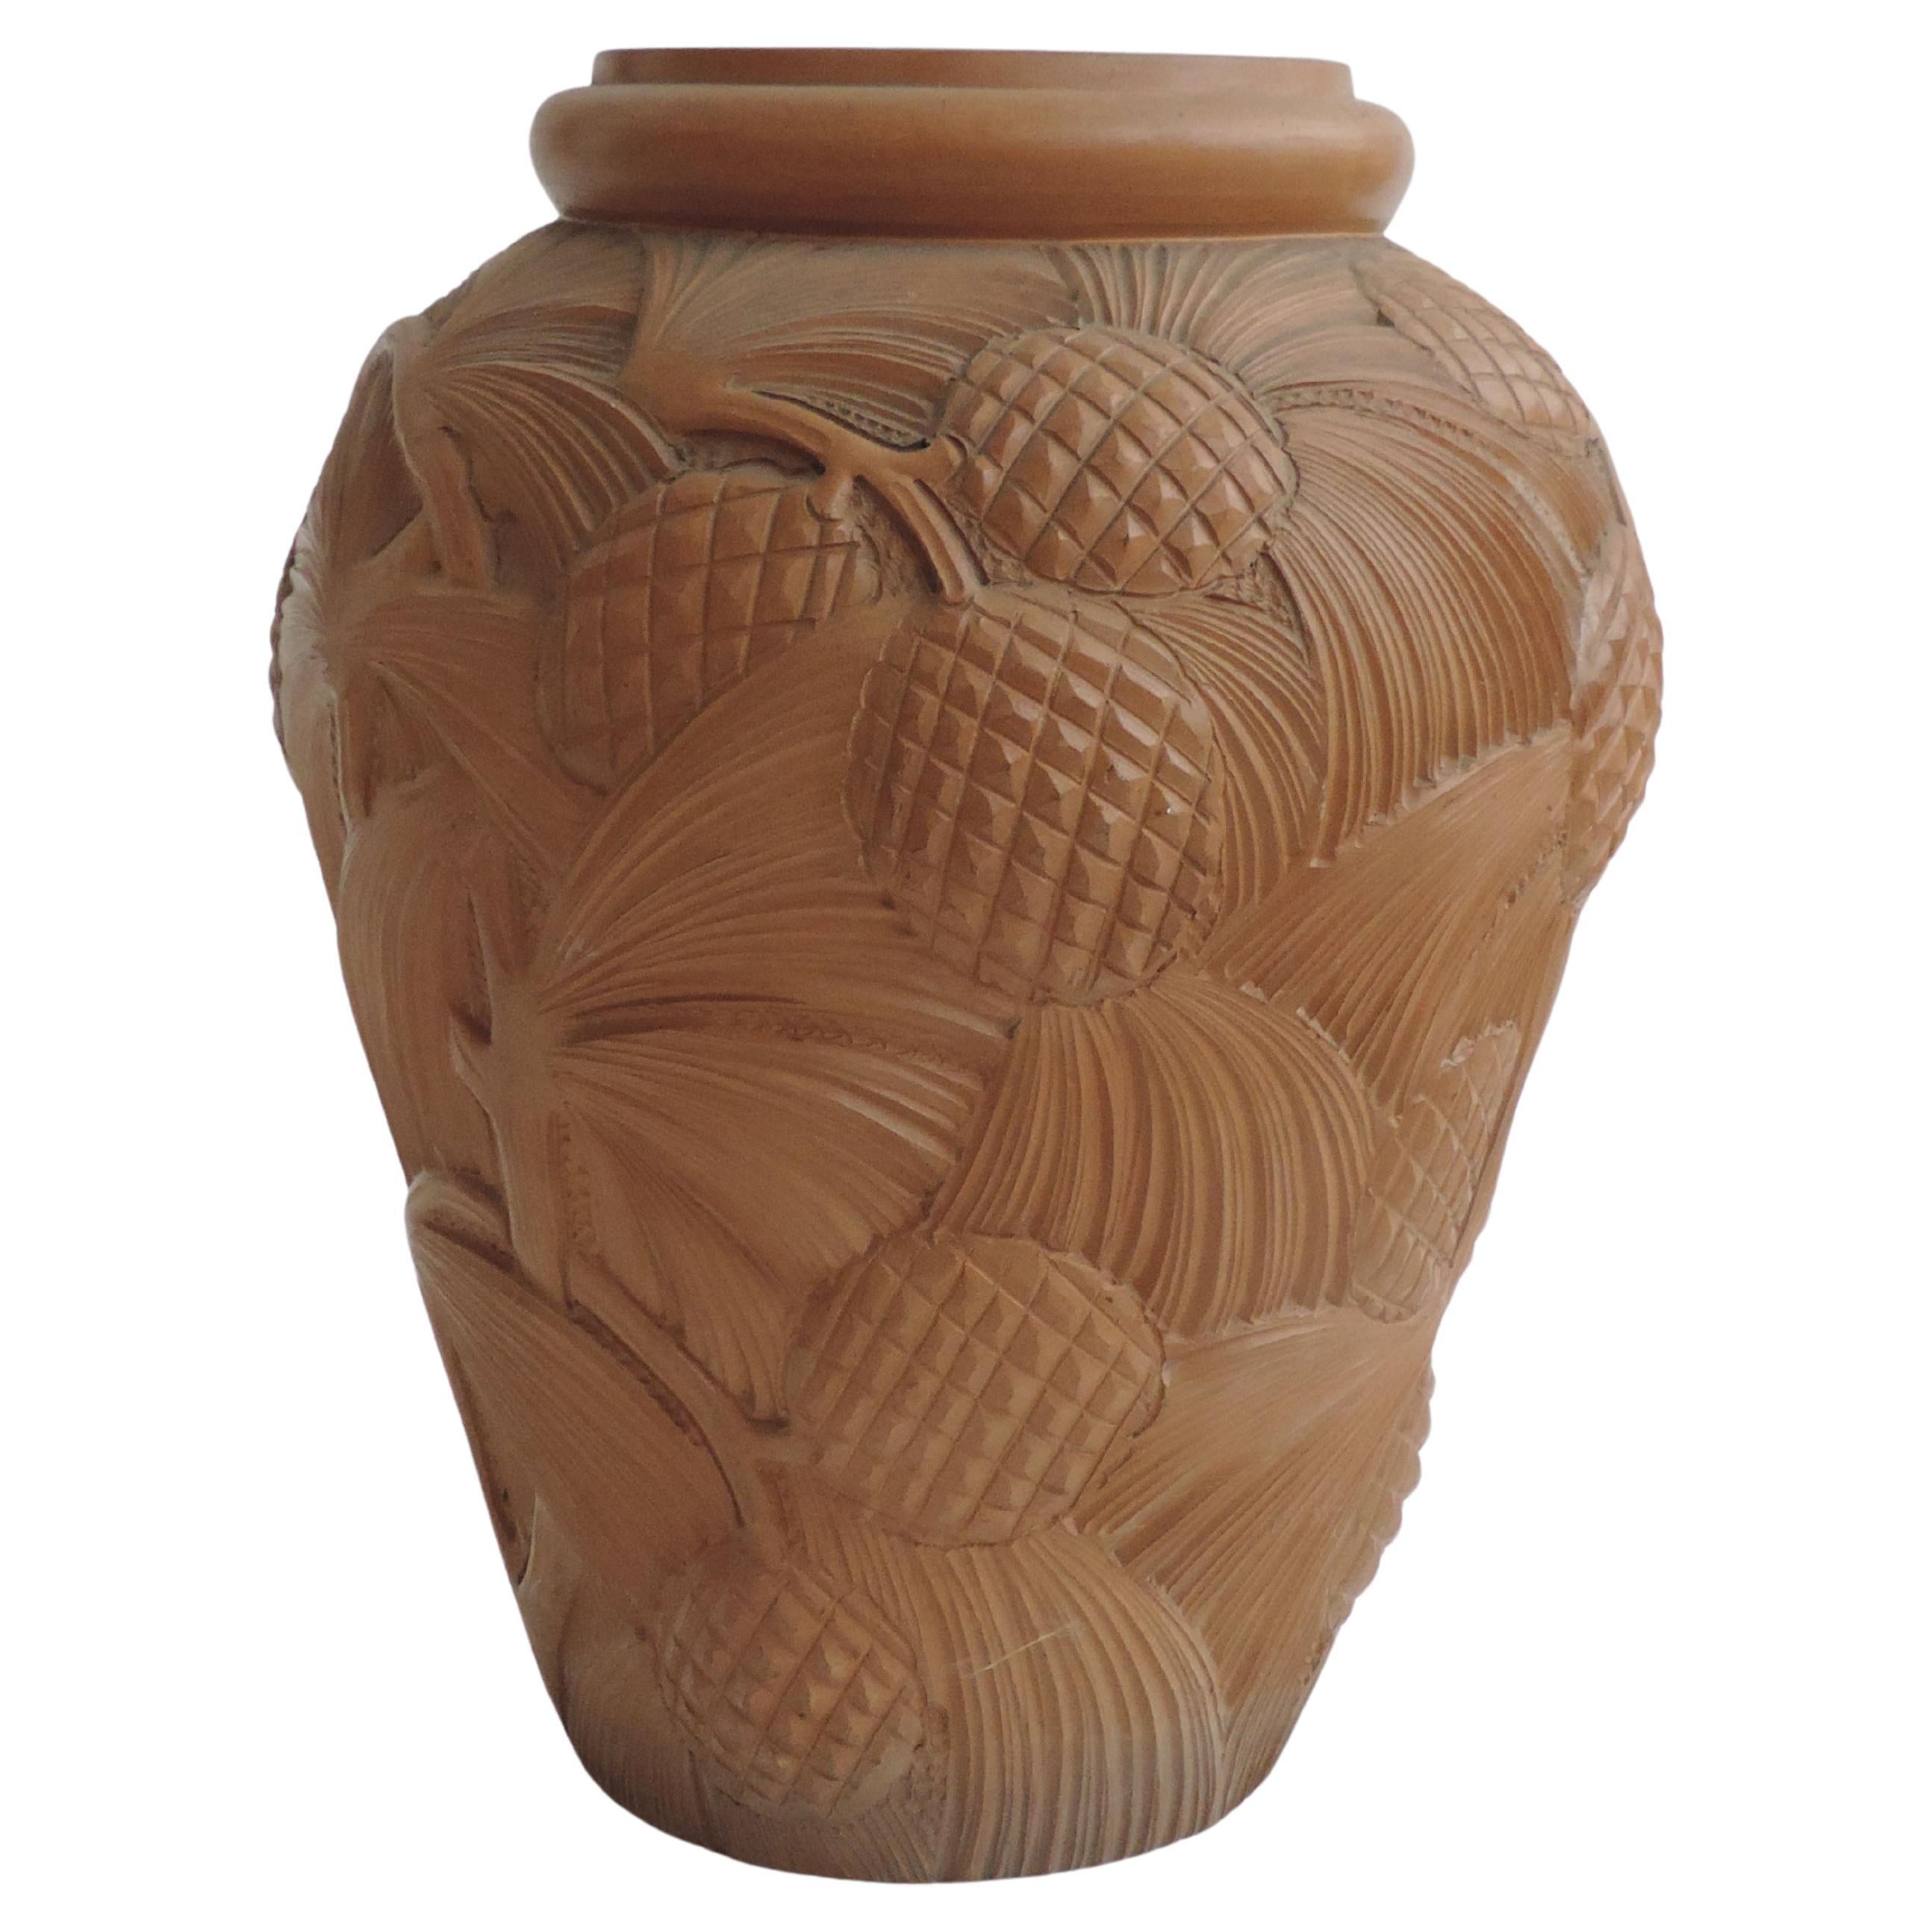 Italian Large Pines Decorated Terracotta Vase, 1940s For Sale